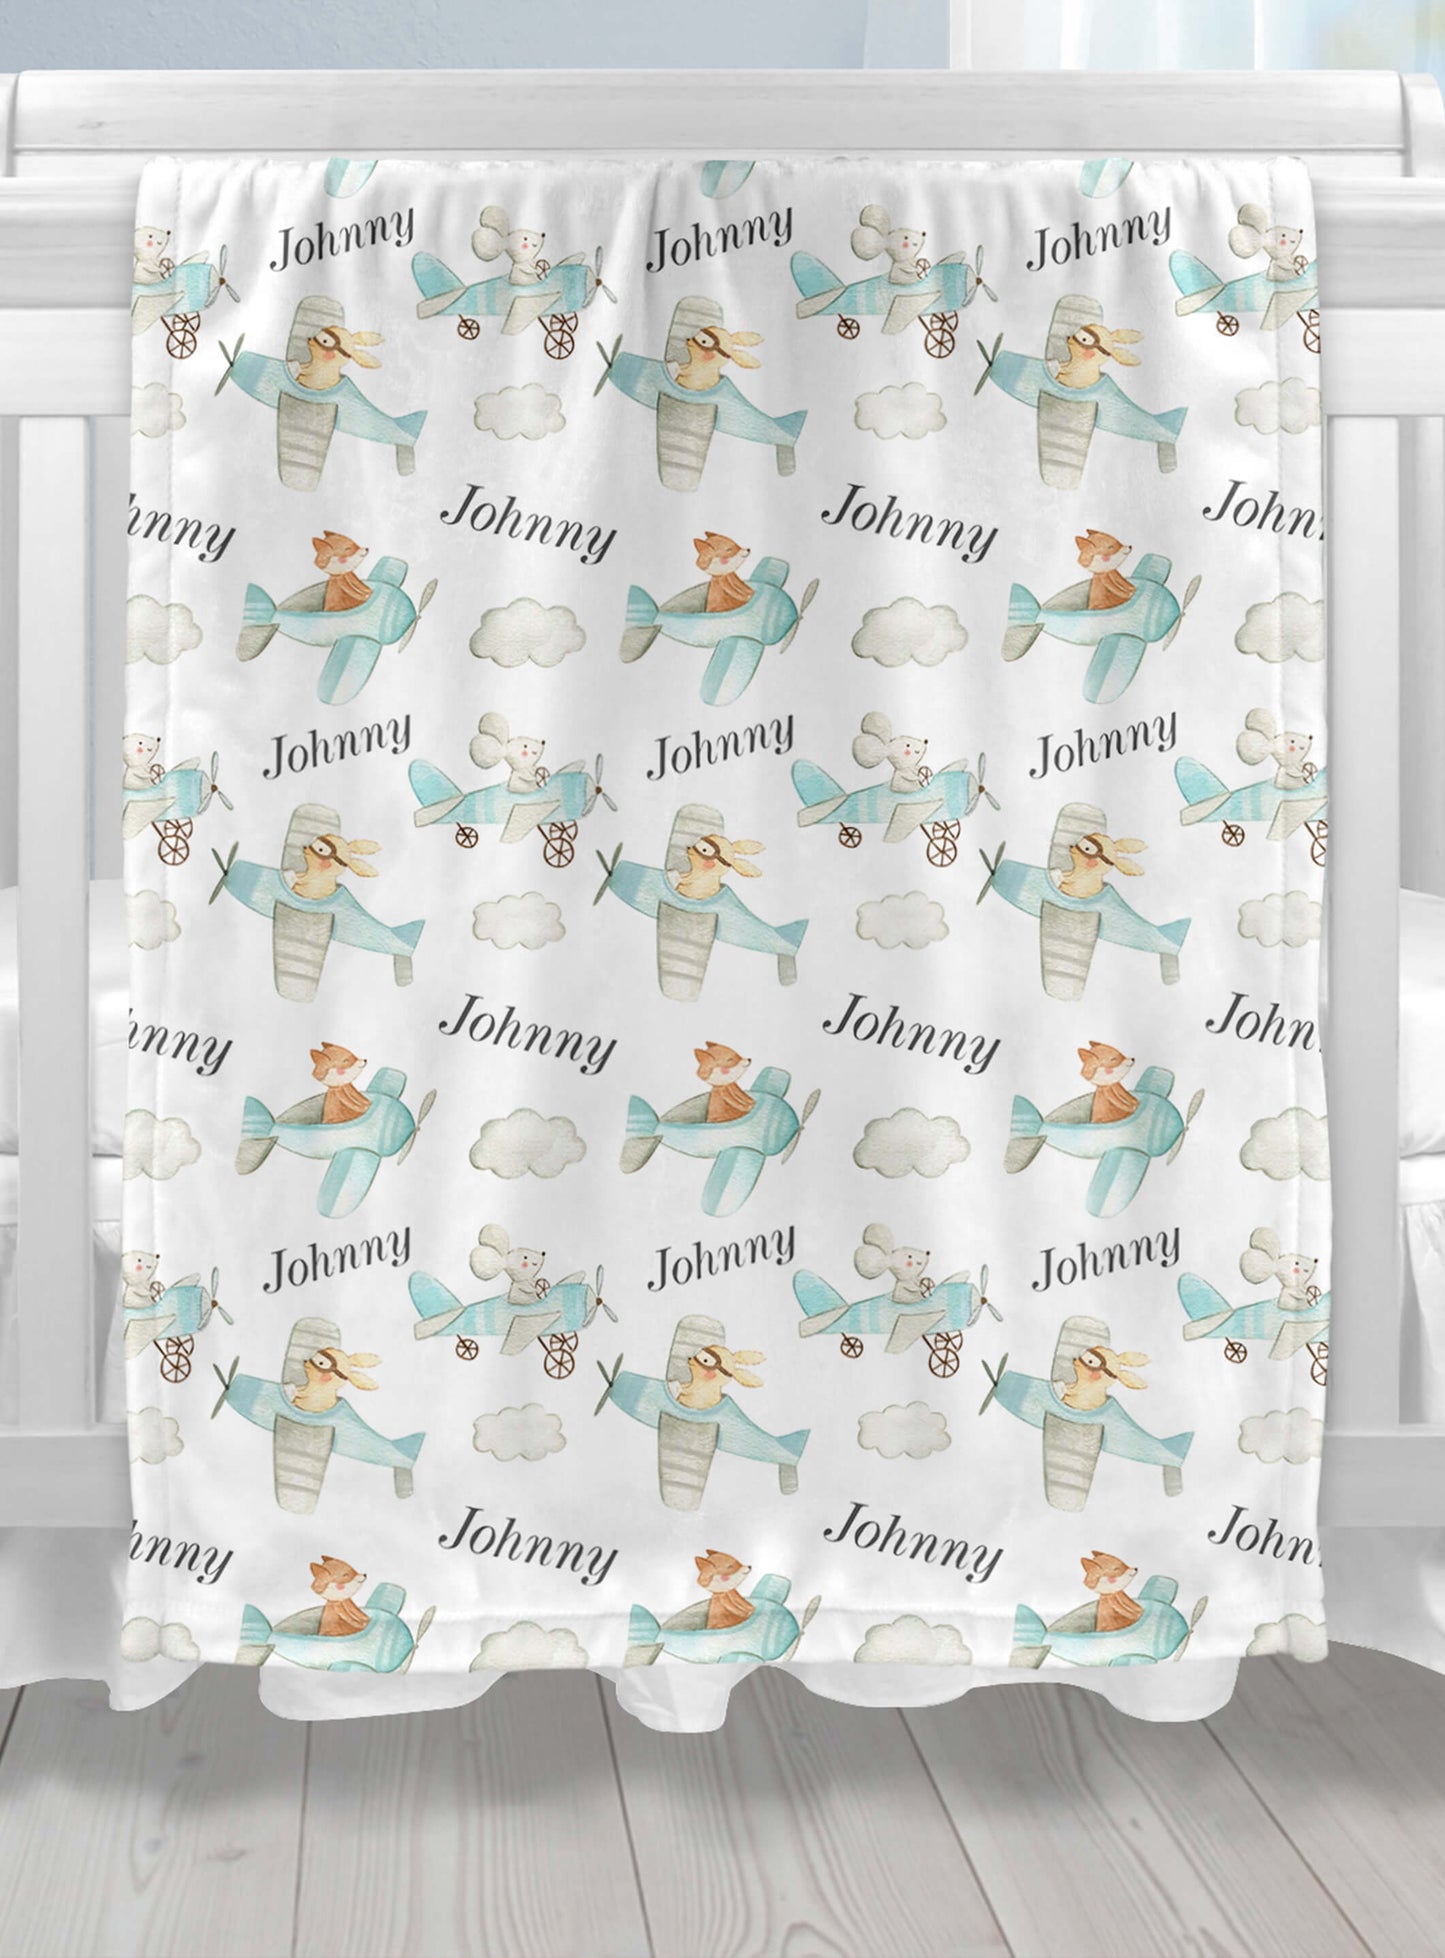 Custom Baby Name Blanket with Planes, Mouse, Rabbit and Fox